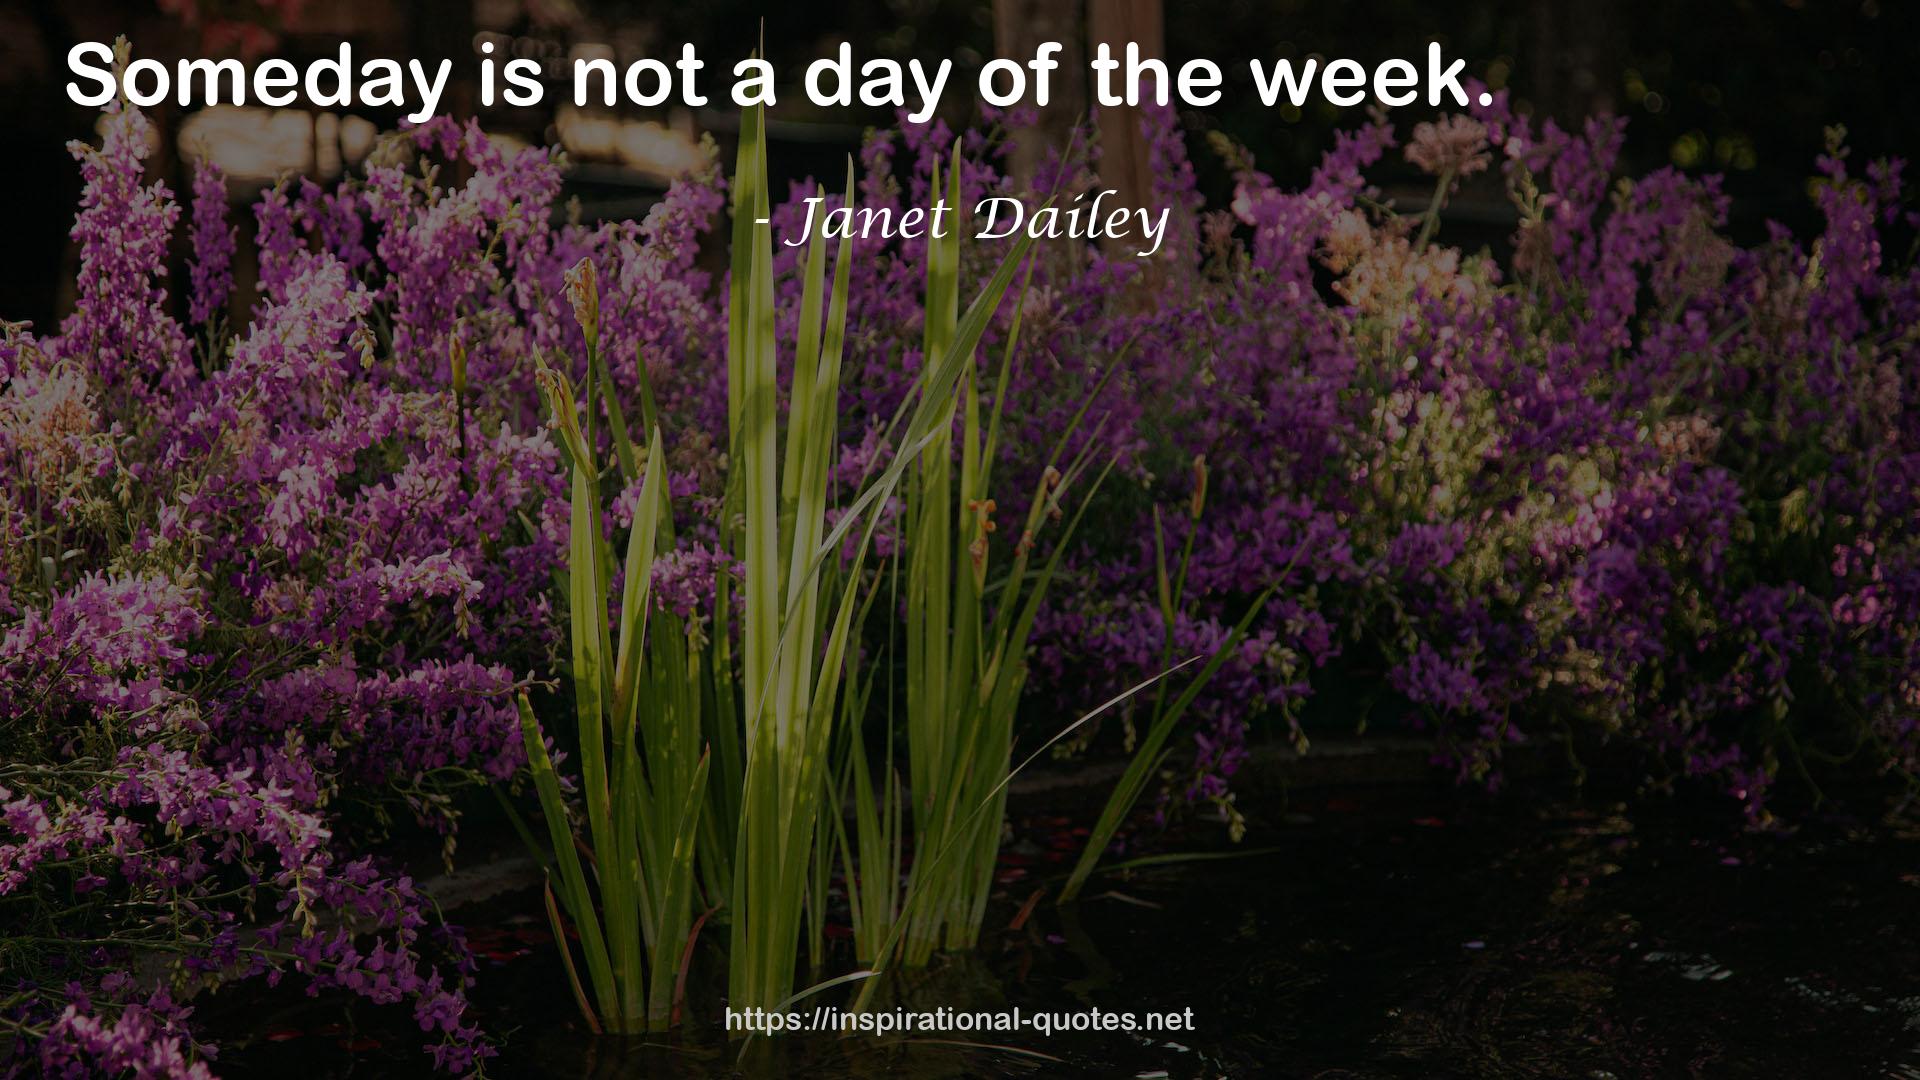 Janet Dailey QUOTES